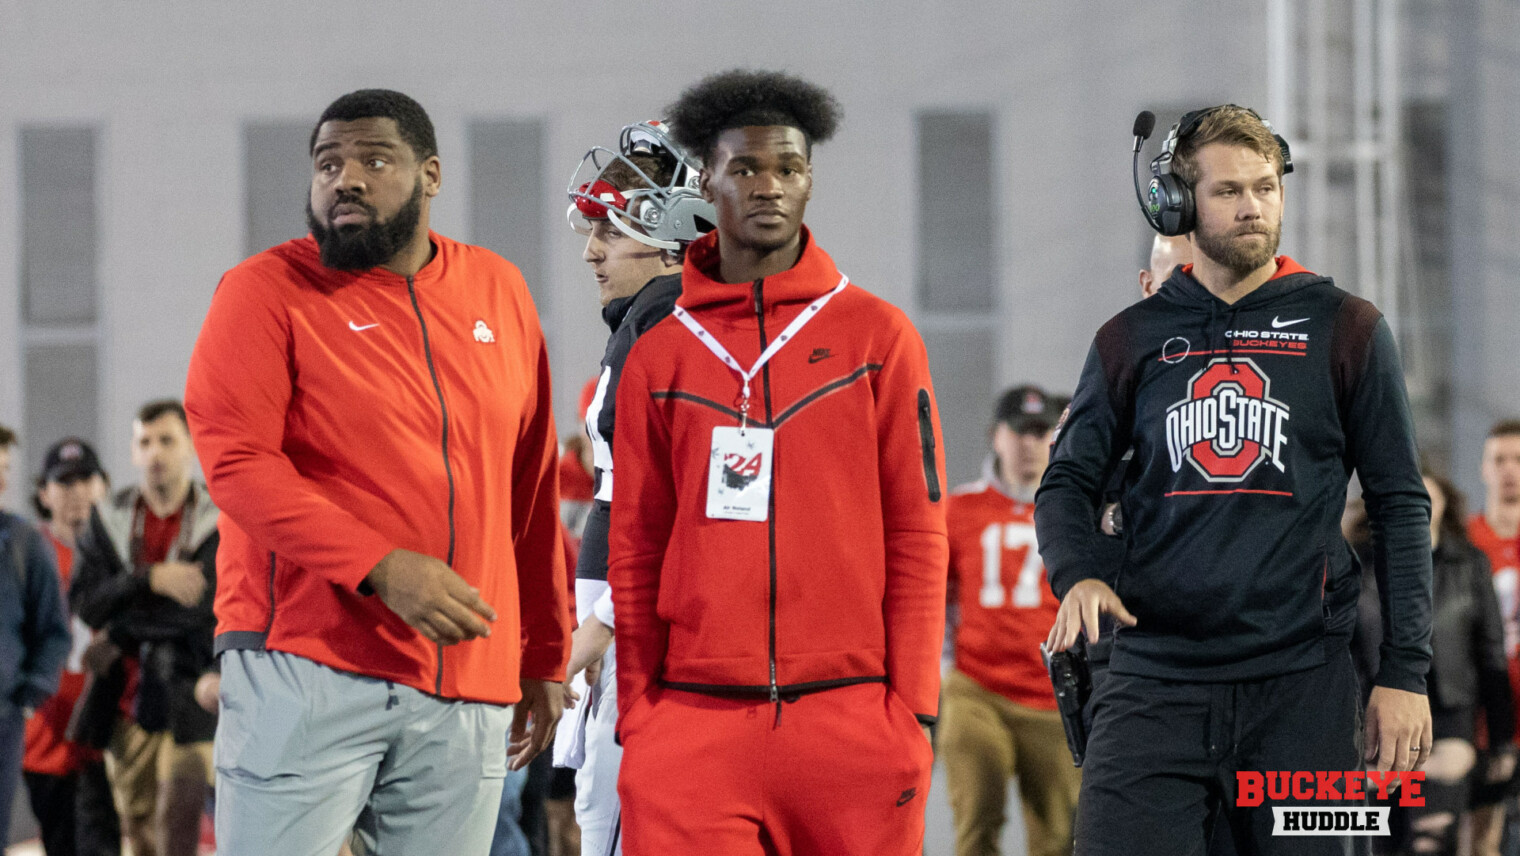 As Air Noland Decision Looms, What's Ohio State's Lure? Buckeye Huddle